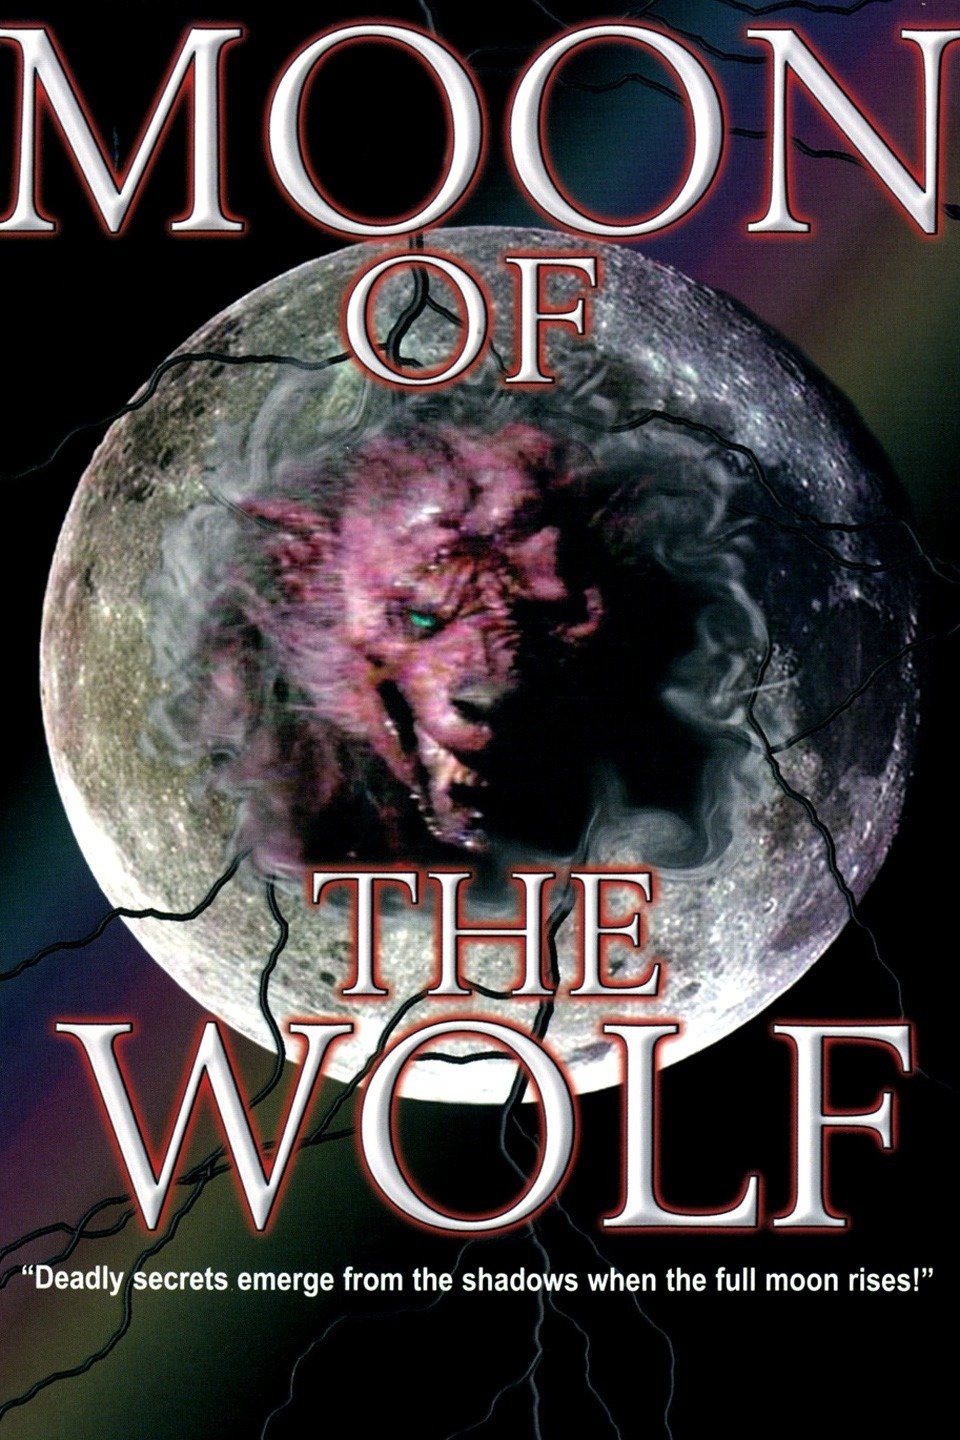 moon of the wolf movie review